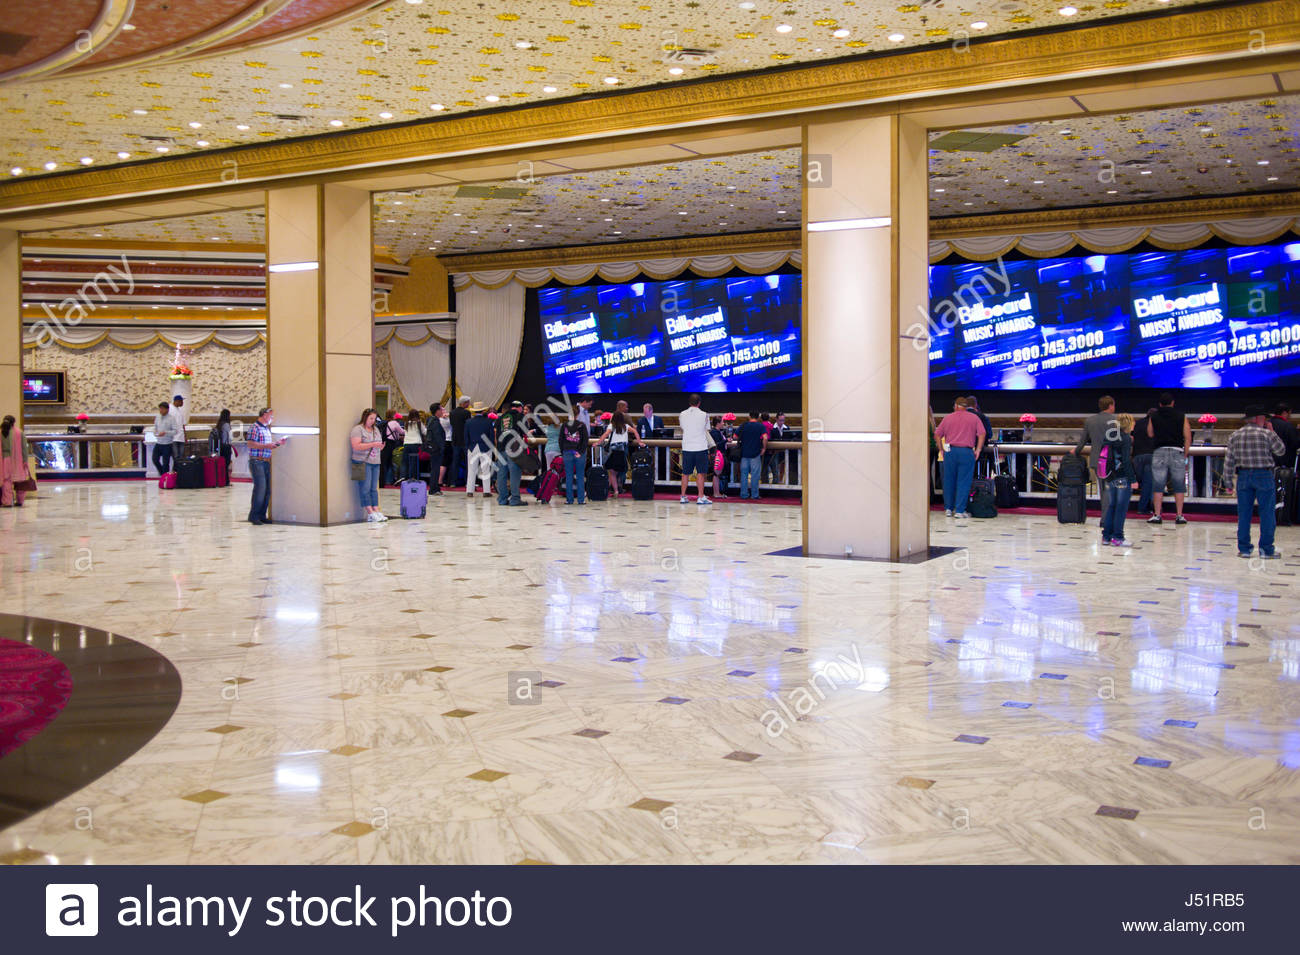 Mgm Grand Hotel And Casino Stock Photos Mgm Grand Hotel And